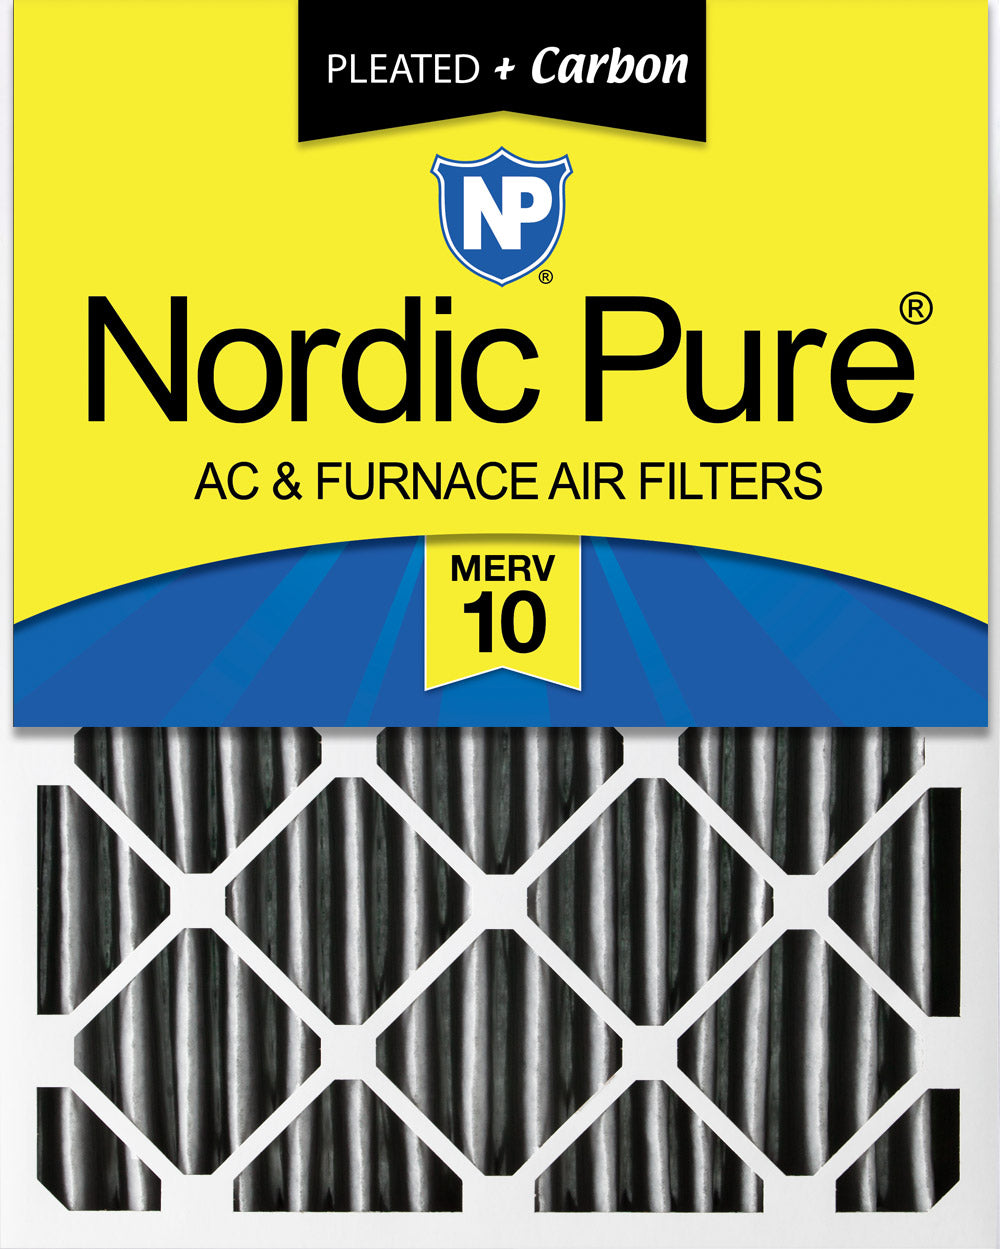 24x24x4 (3 5/8) Furnace Air Filters MERV 10 Pleated Plus Carbon